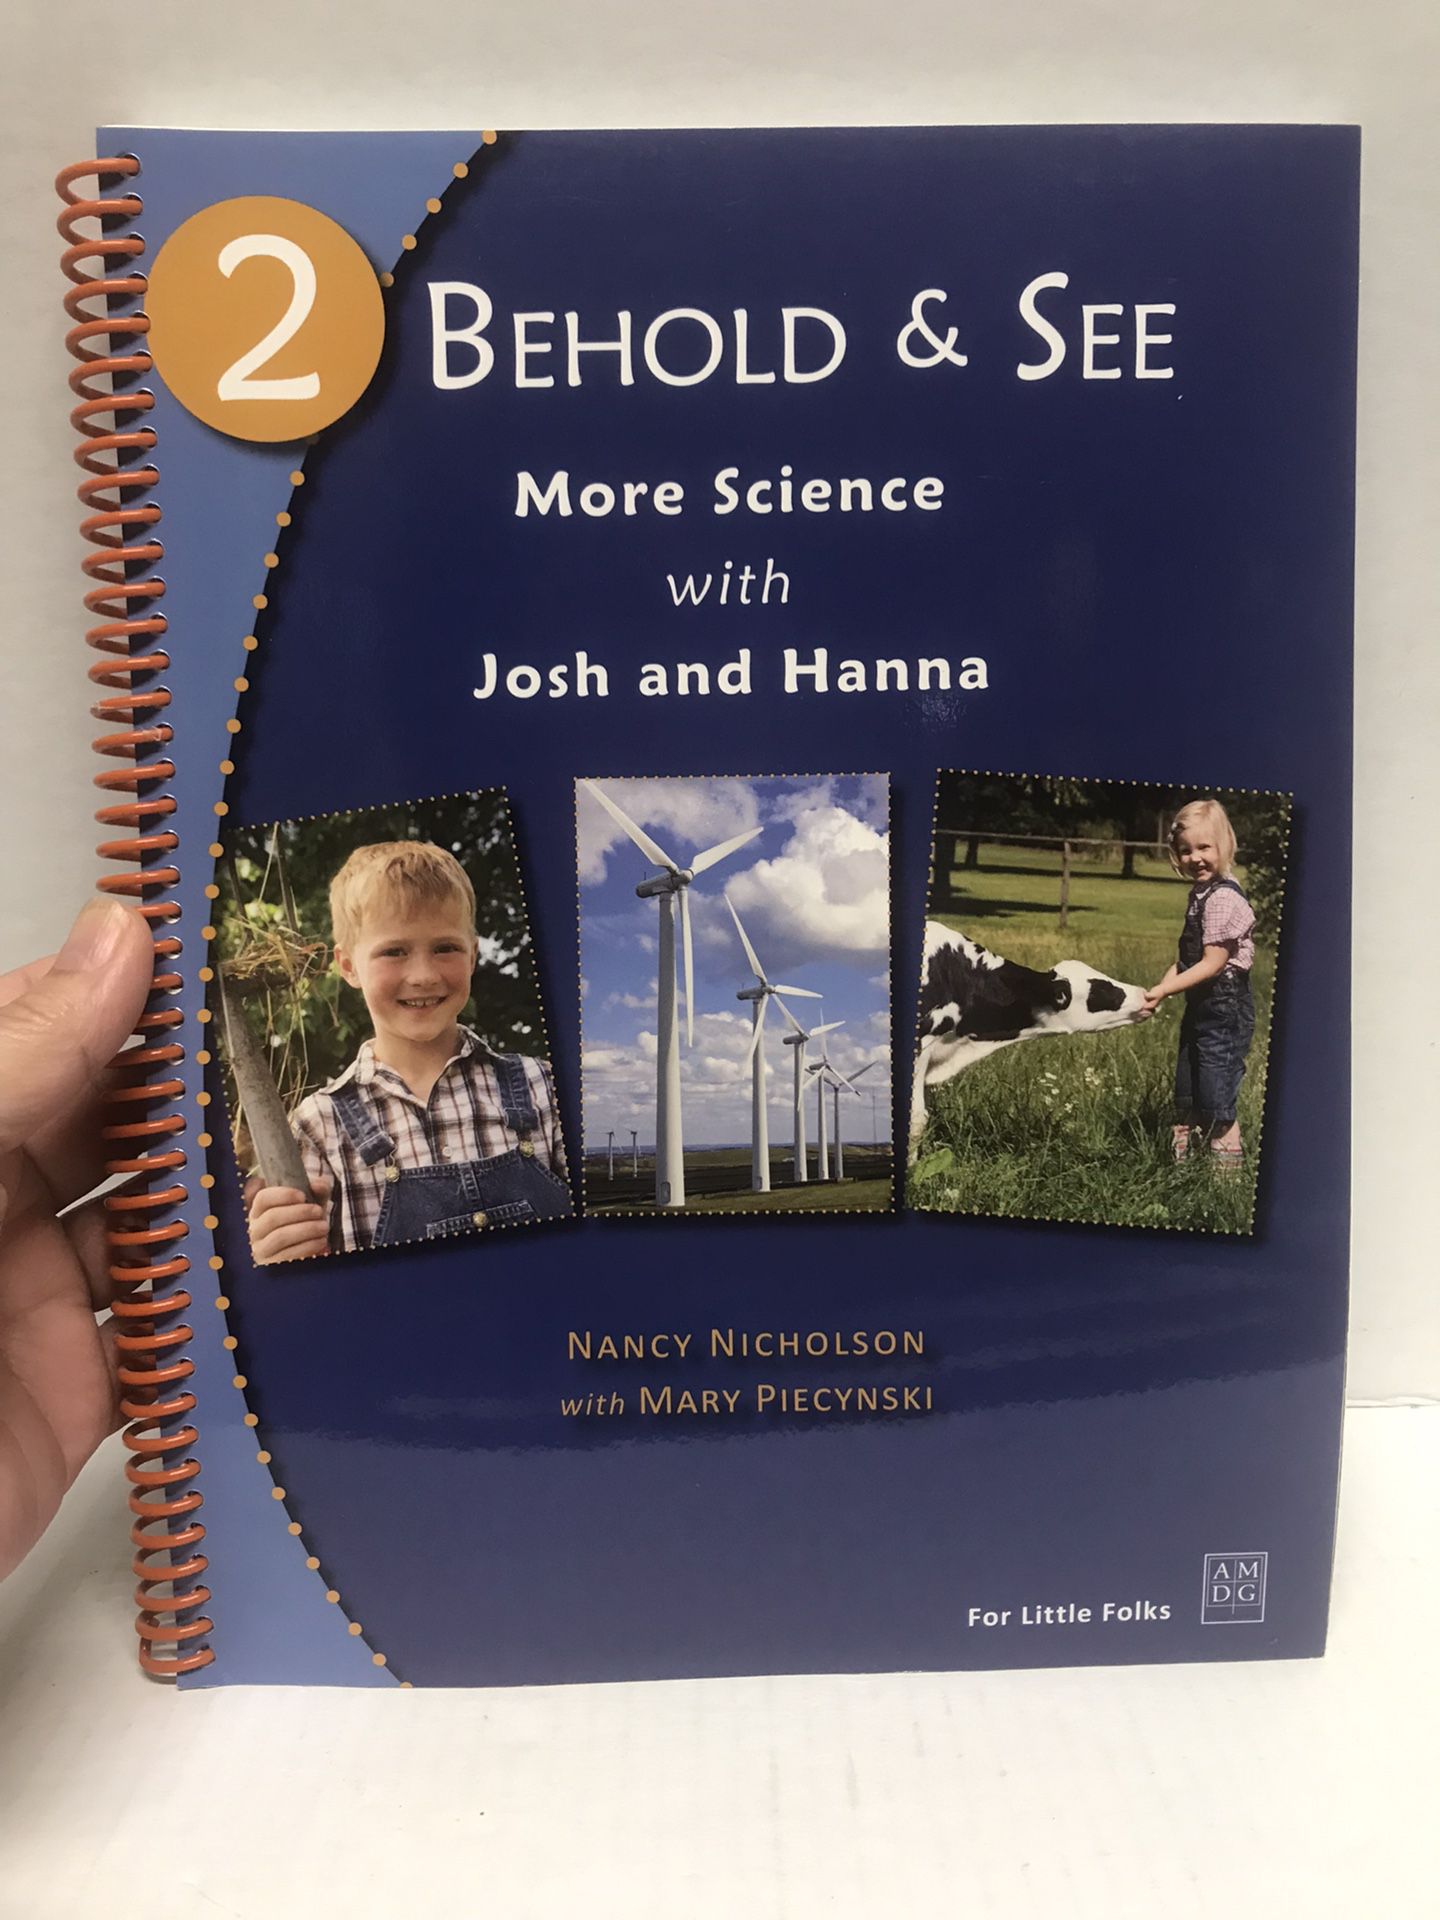 Behold and see, more science with Josh and Hanna